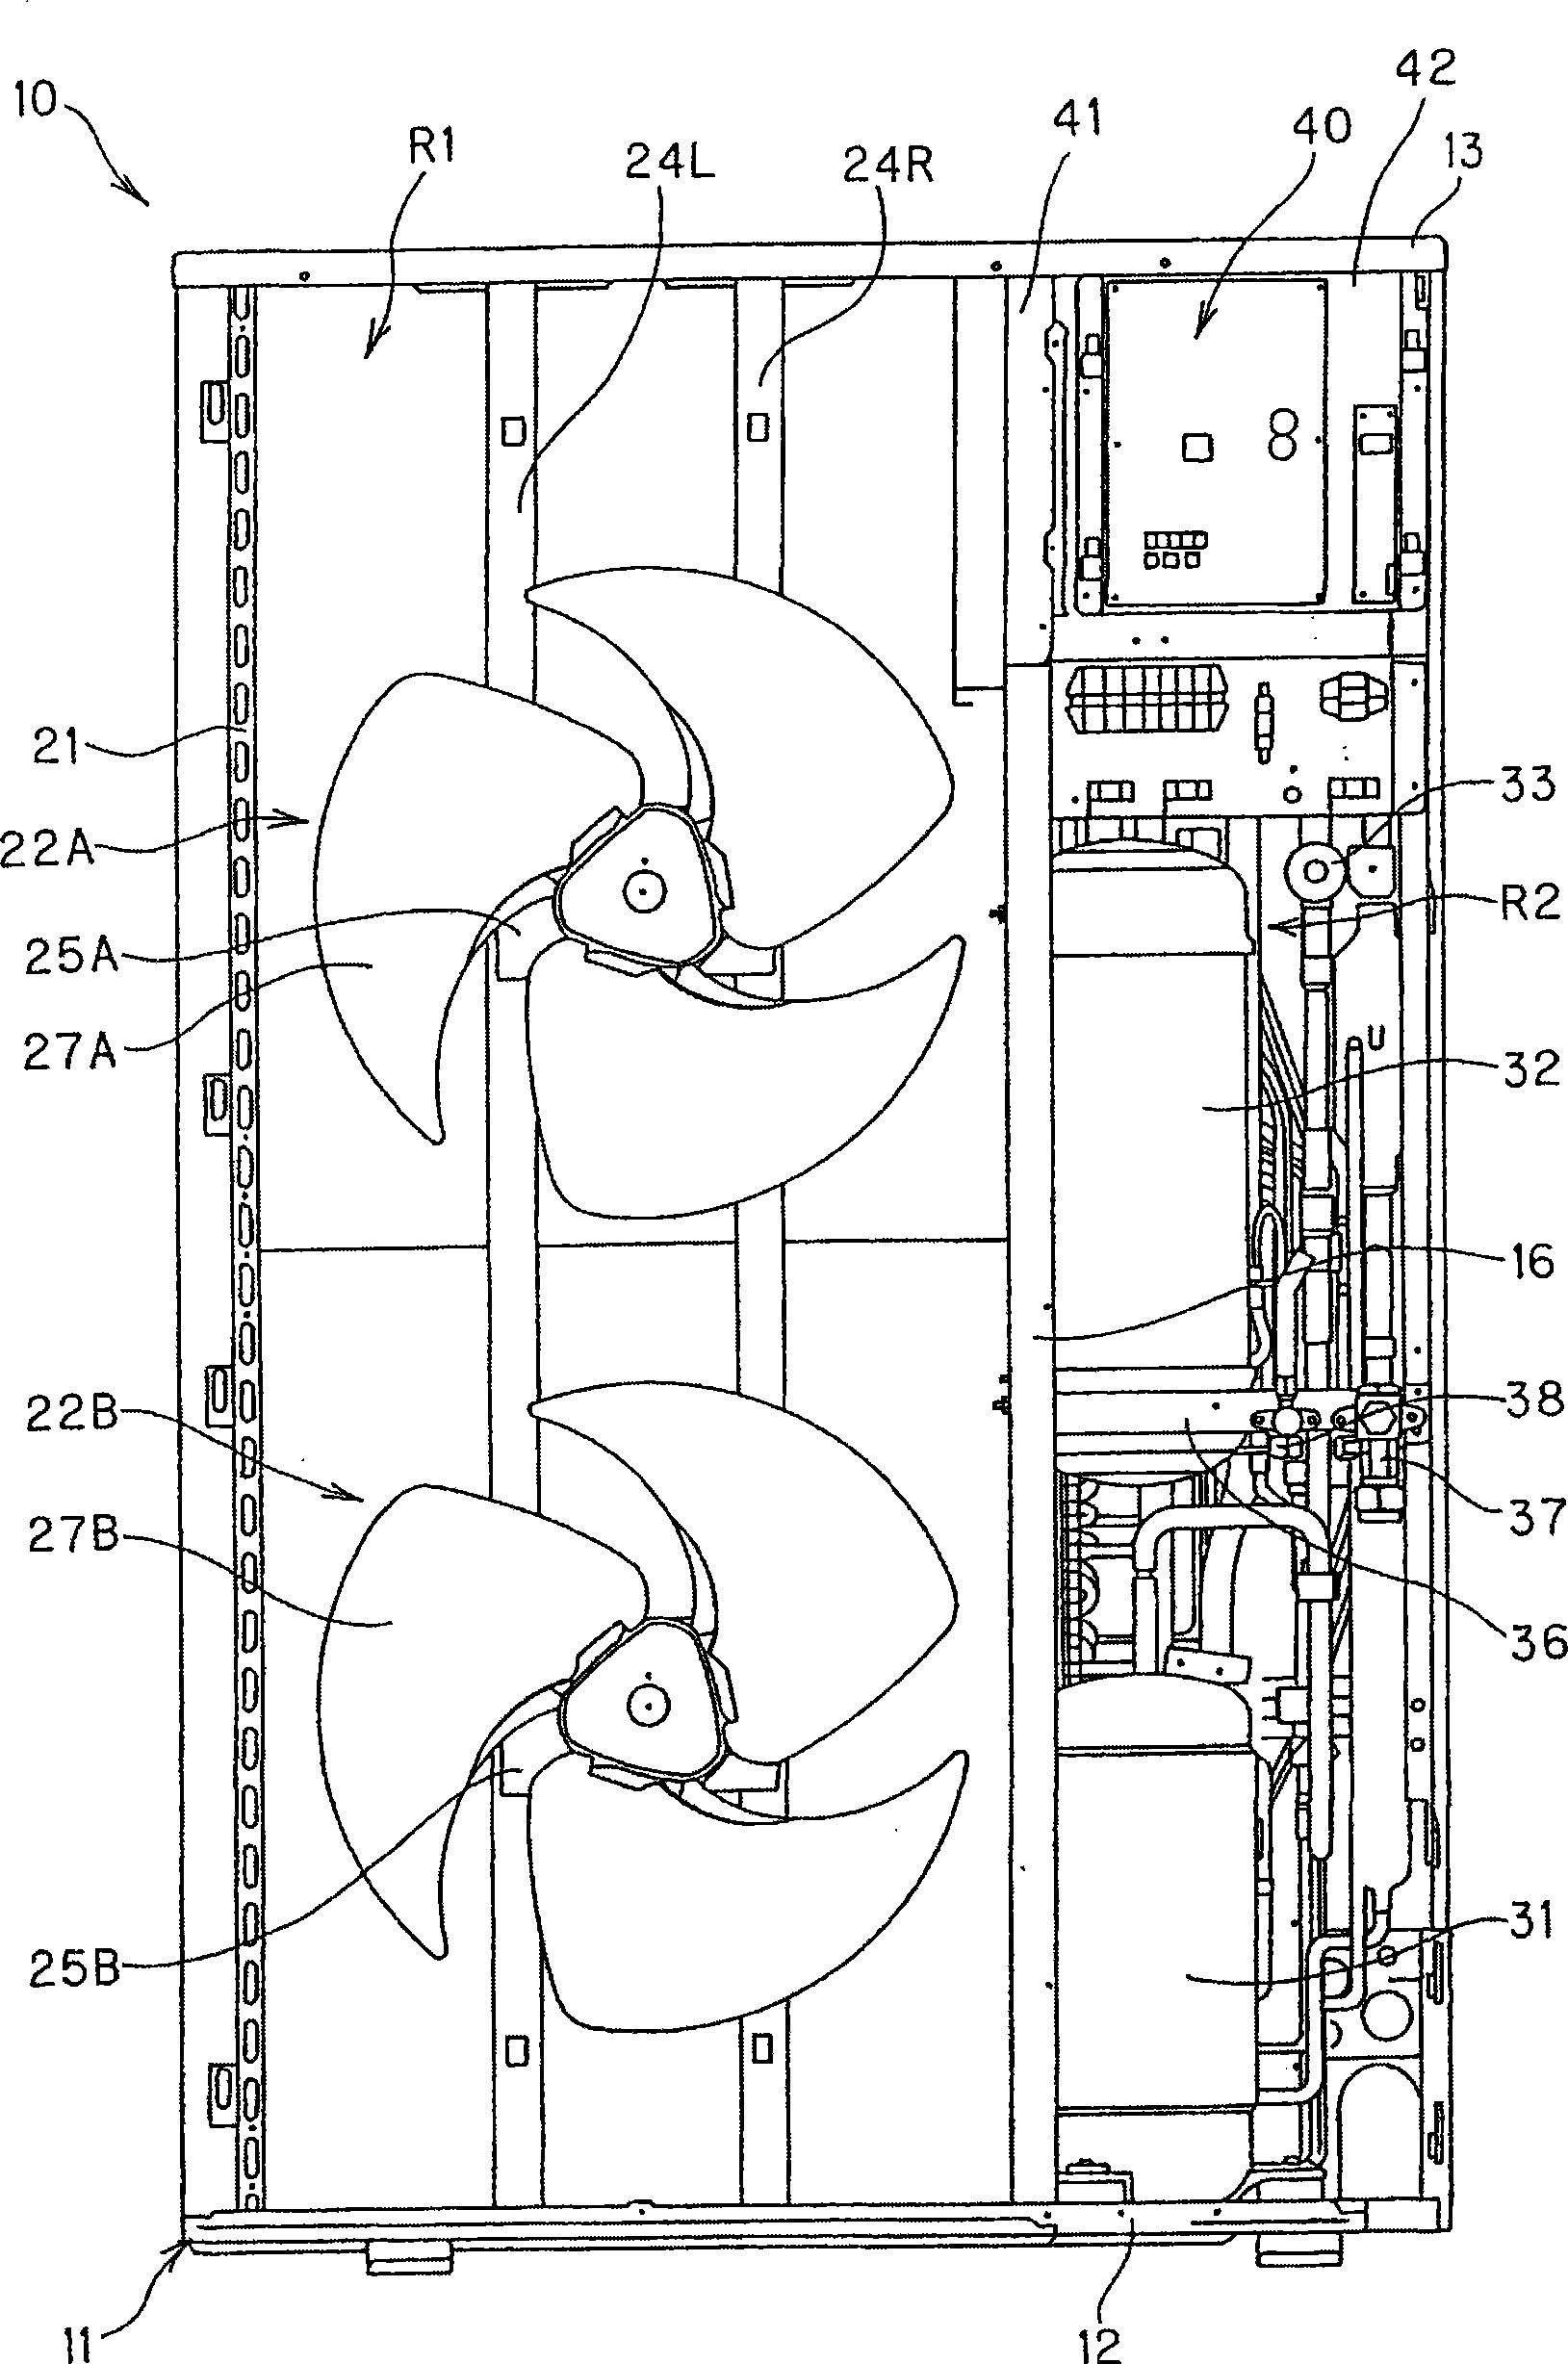 Outside unit of air conditioning apparatus